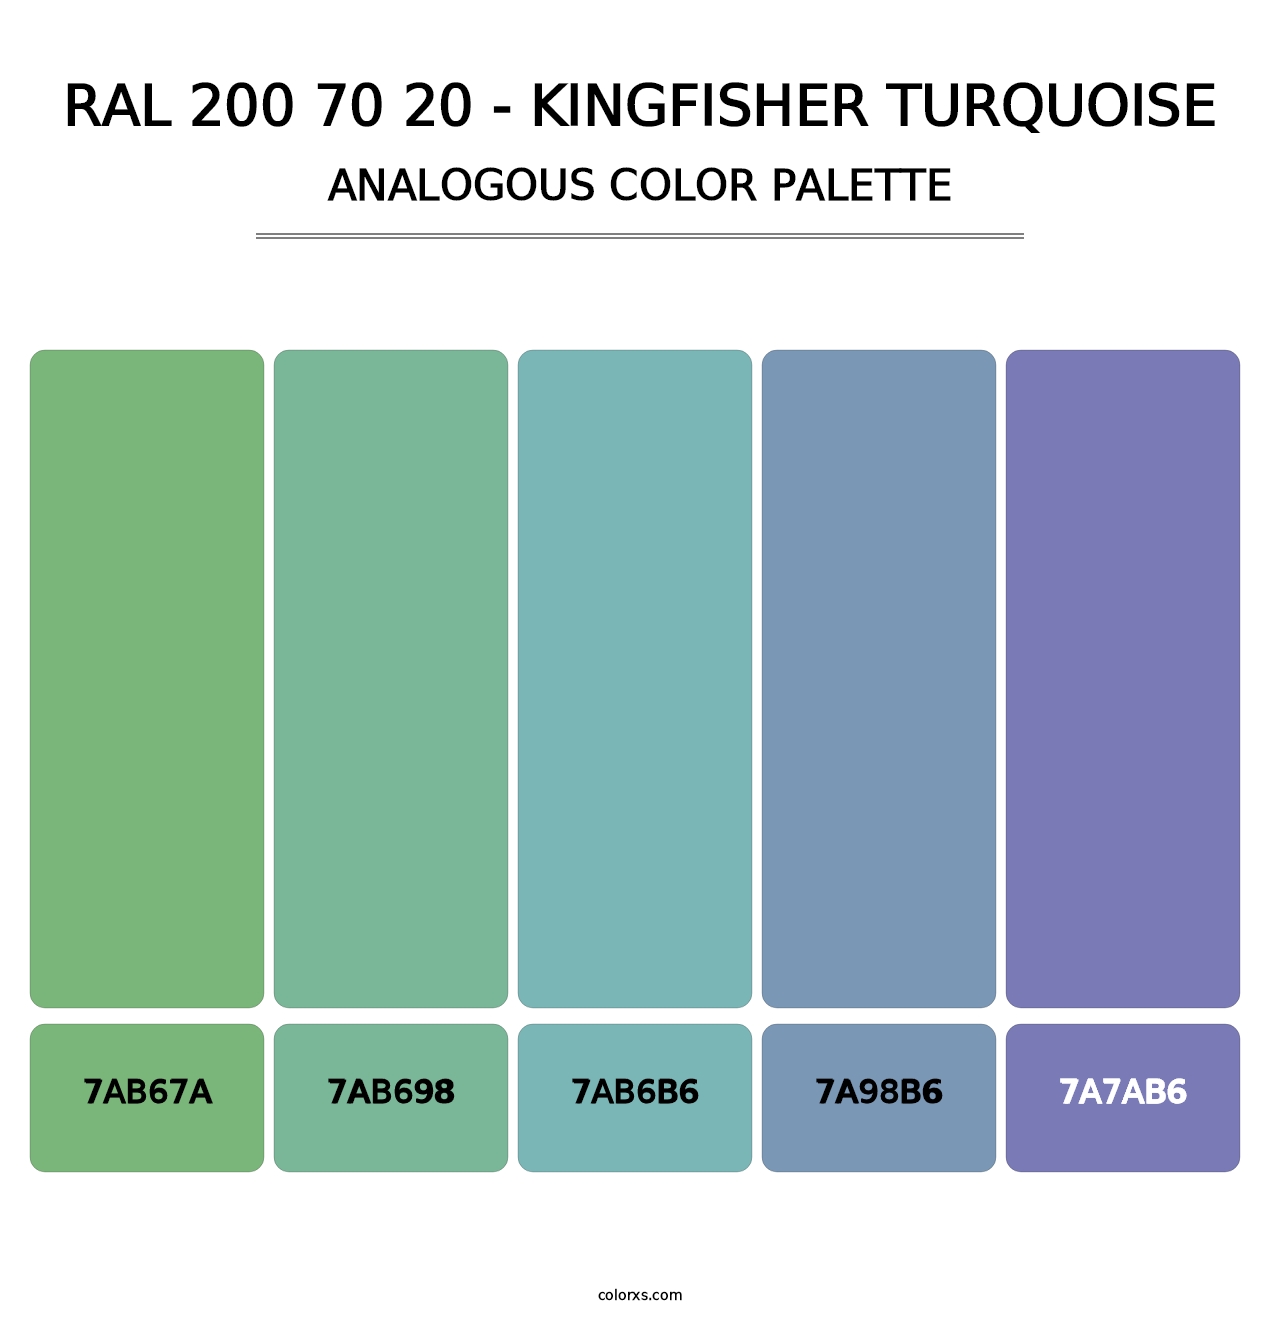 RAL 200 70 20 - Kingfisher Turquoise - Analogous Color Palette